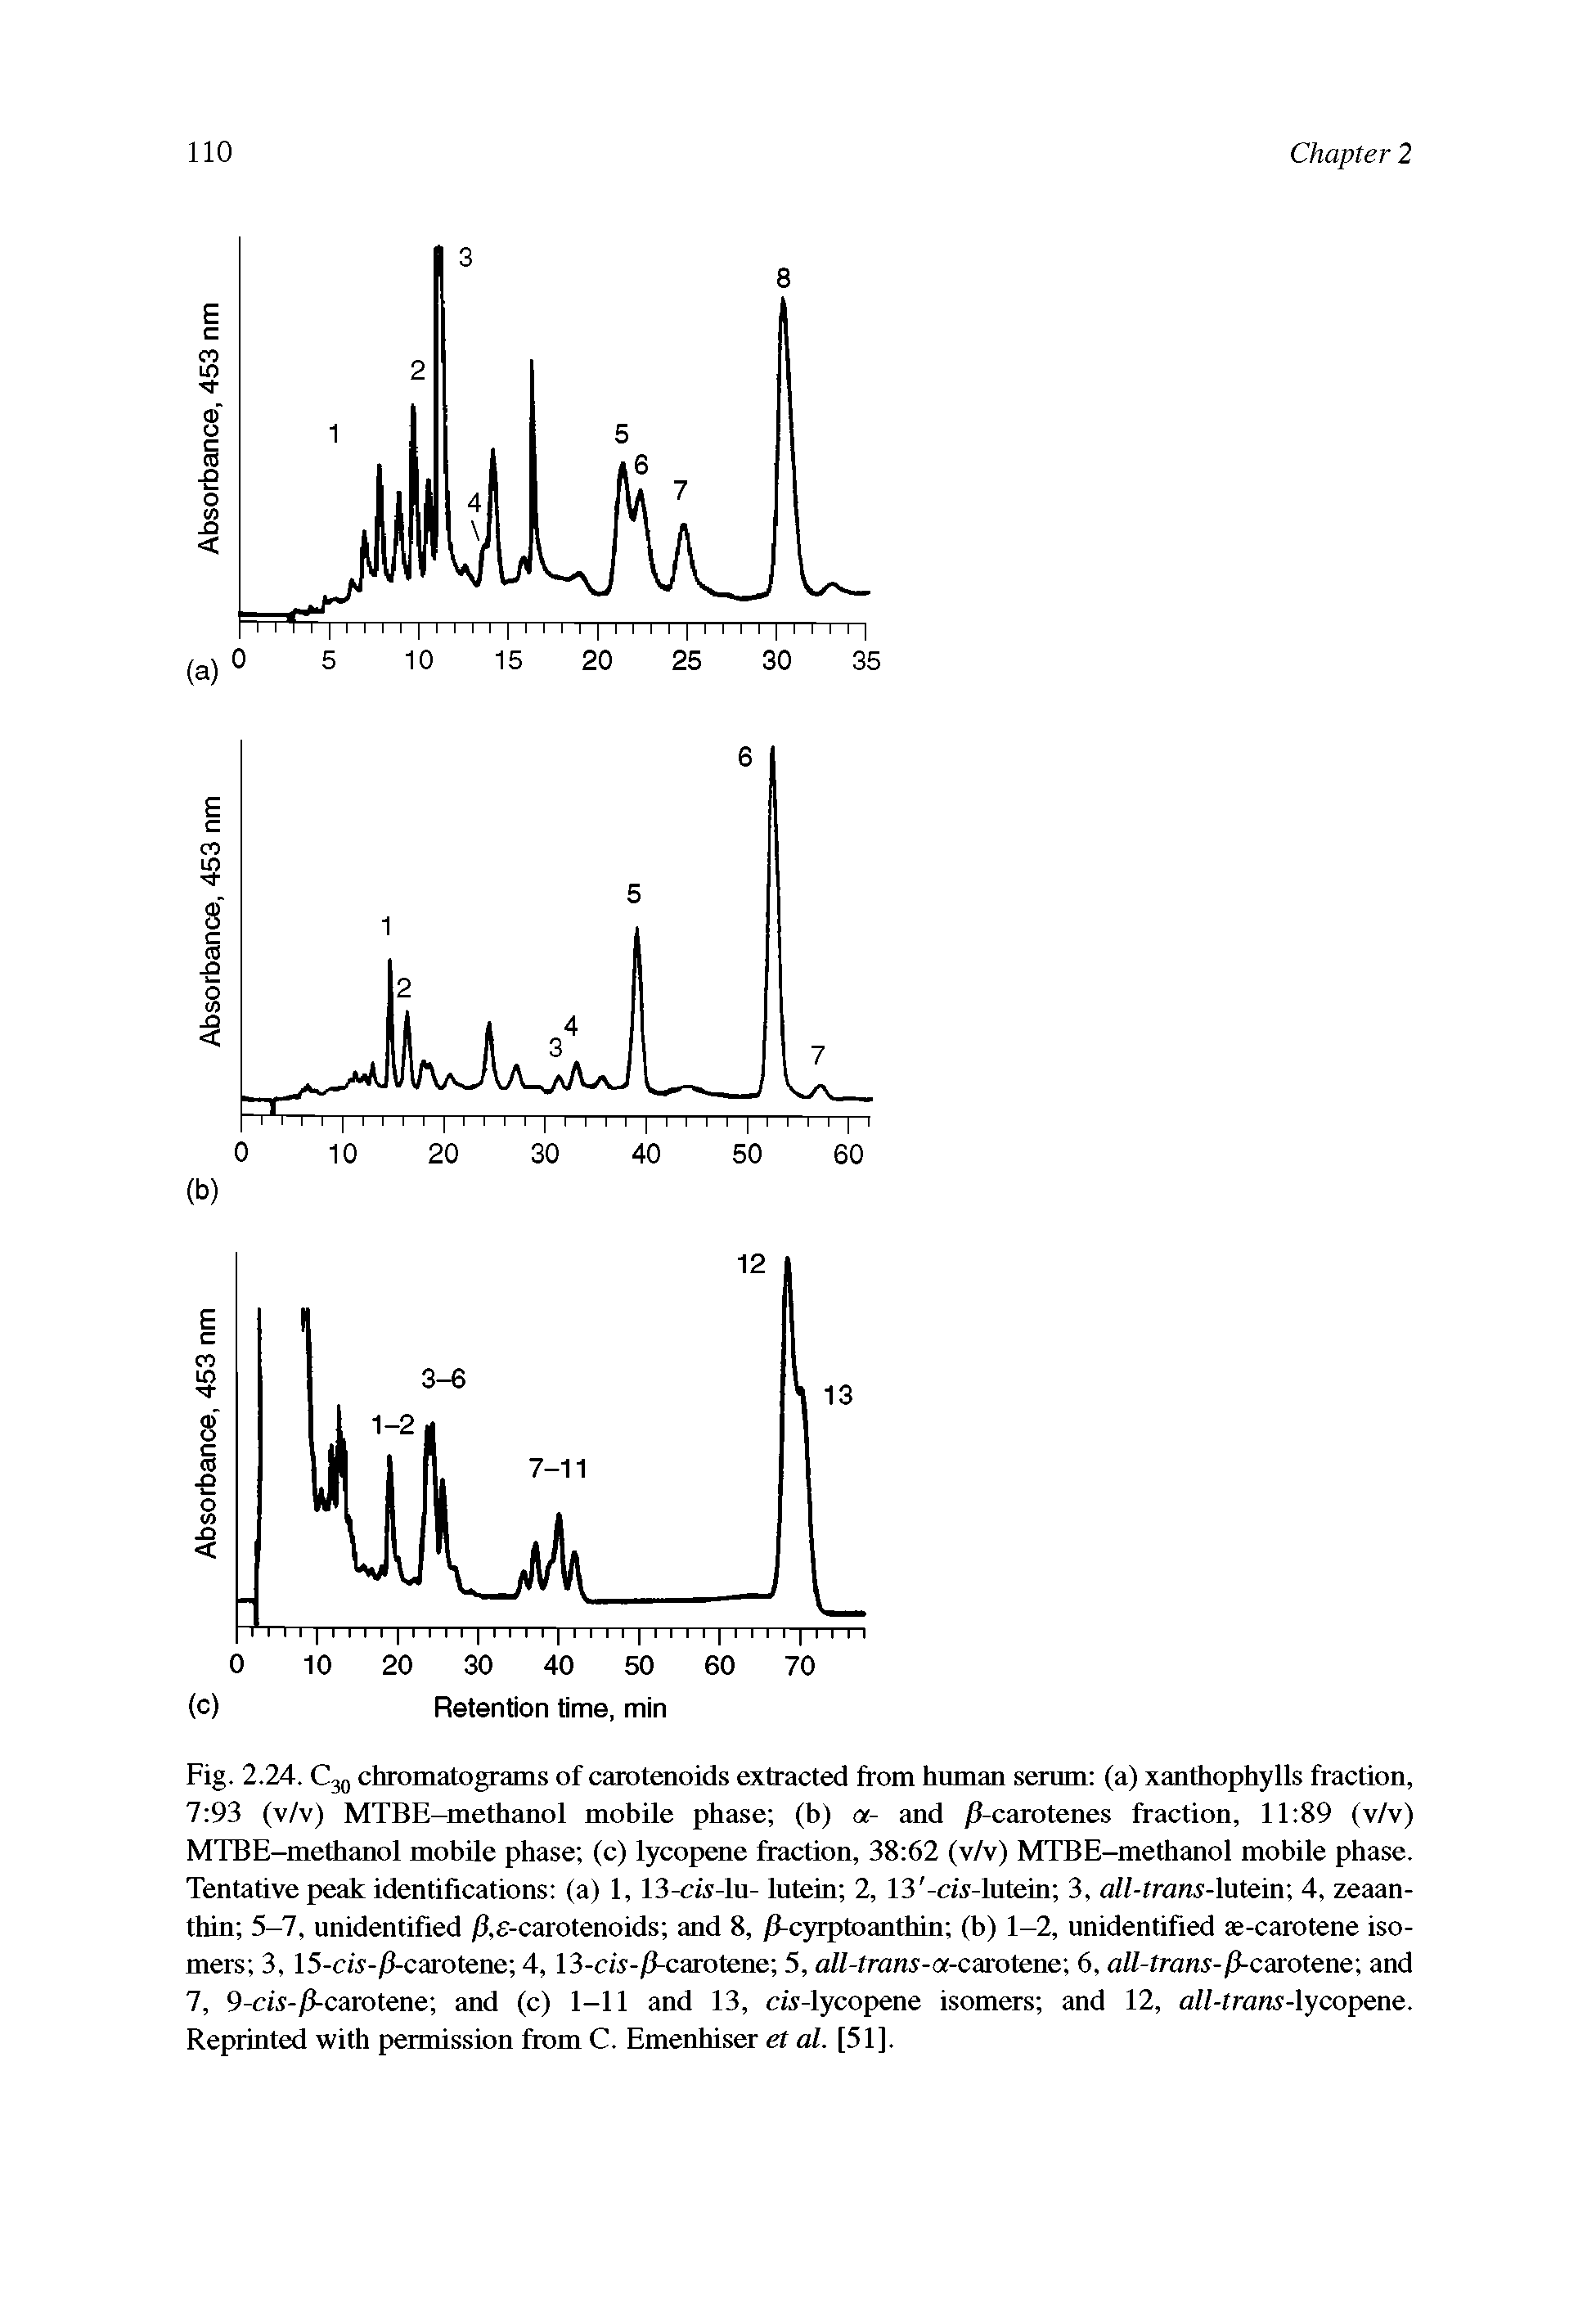 Fig. 2.24. C30 chromatograms of carotenoids extracted from human serum (a) xanthophylls fraction, 7 93 (v/v) MTBE-methanol mobile phase (b) a- and / -carotenes fraction, 11 89 (v/v) MTBE-methanol mobile phase (c) lycopene fraction, 38 62 (v/v) MTBE-methanol mobile phase. Tentative peak identifications (a) 1, 13-c/s-lu- lutein 2, 13 r/.vlutein 3, a//-/ra s-lutein 4, zeaan-thin 5-7, unidentified P,e-carotenoids and 8, / -cyrptoanthin (b) 1-2, unidentified ae-carotene isomers 3, 15-eH -/f-carotenc 4, 13-cw-/ -carotene 5, all-trans-a-carotene 6, all-trans-P-carotene and 7, 9-ci.v-/3-carotene and (c) 1-11 and 13, c/s-lycopene isomers and 12, all-trans-lycopene. Reprinted with permission from C. Emenhiser el al. [51].